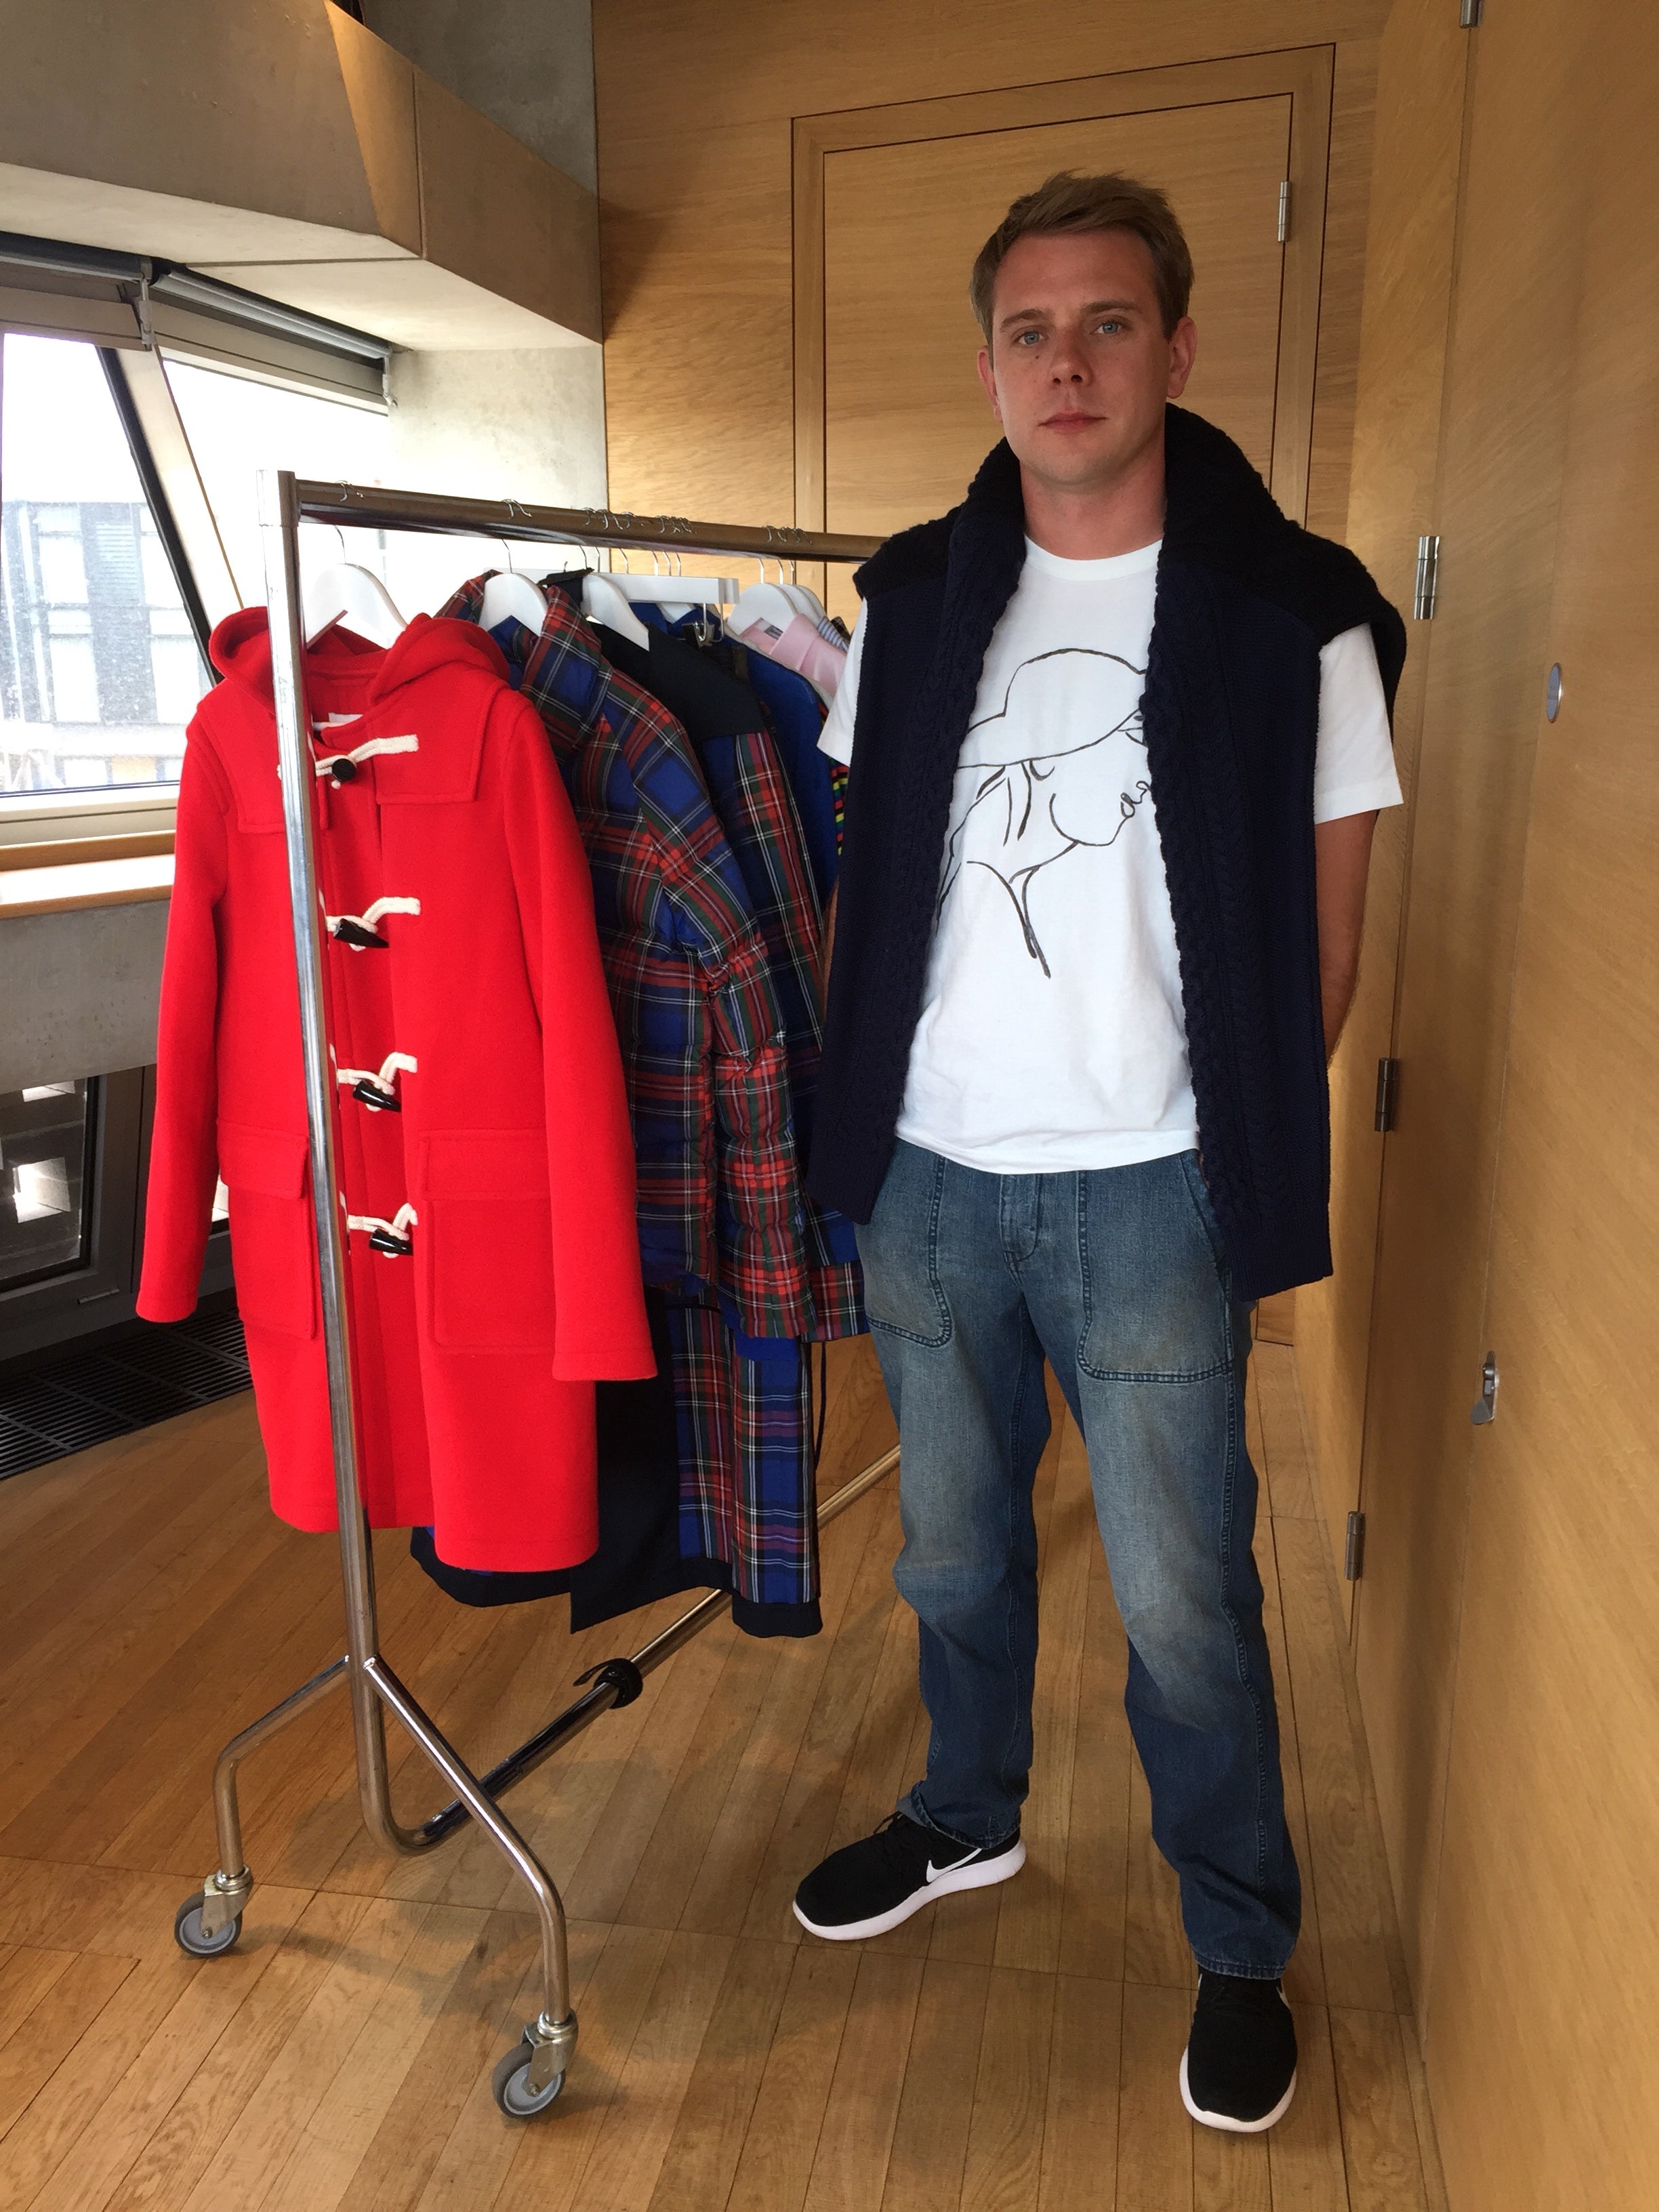 Made in London: the capital's designer exports from JW Anderson to